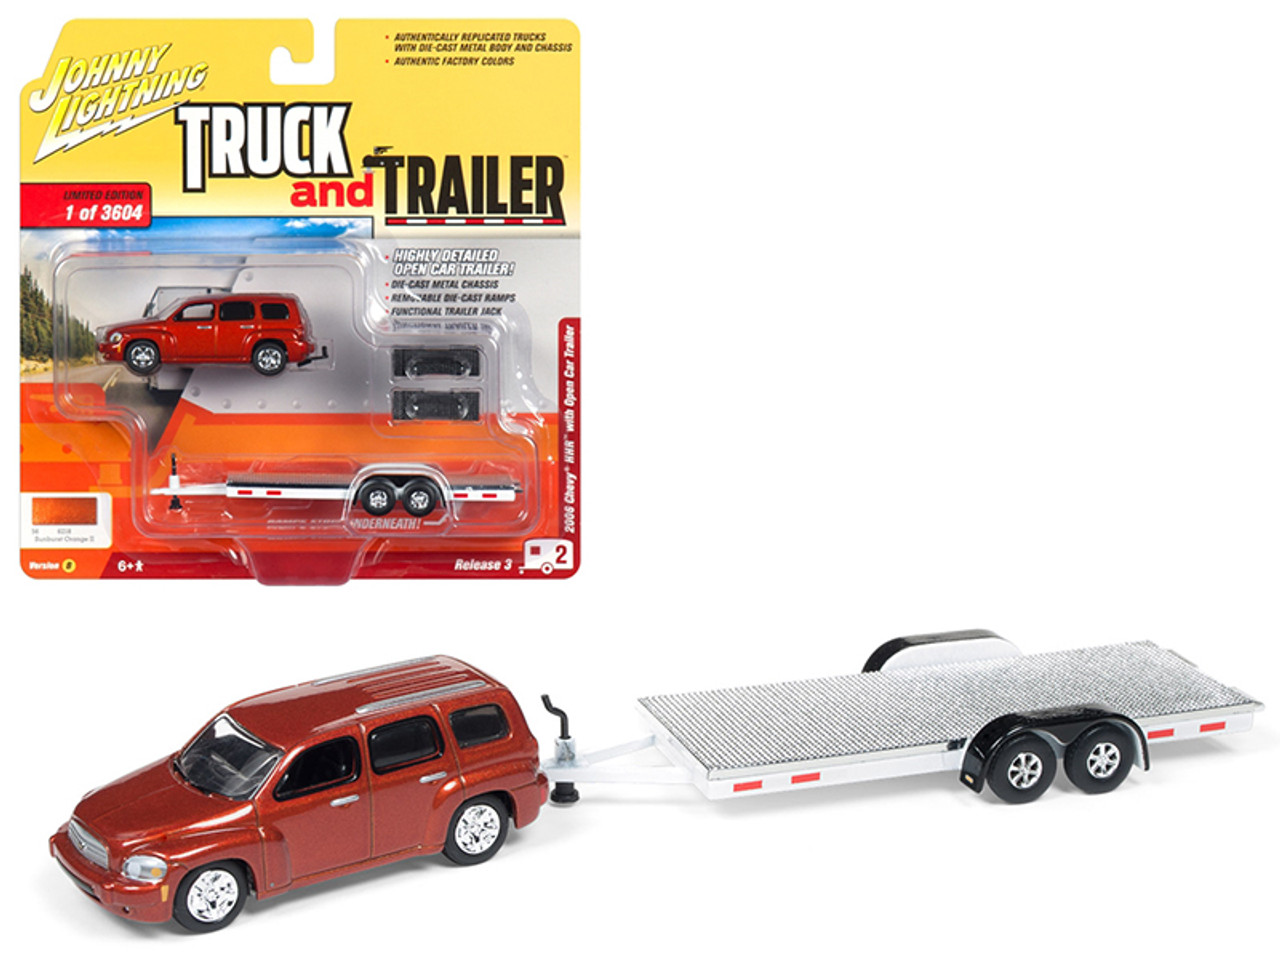 2006 Chevrolet HHR Daytona Metallic Orange with Chrome Open Car Trailer Limited Edition to 3,604 pieces Worldwide "Truck and Trailer" Series 3 1/64 Diecast Model Car by Johnny Lightning